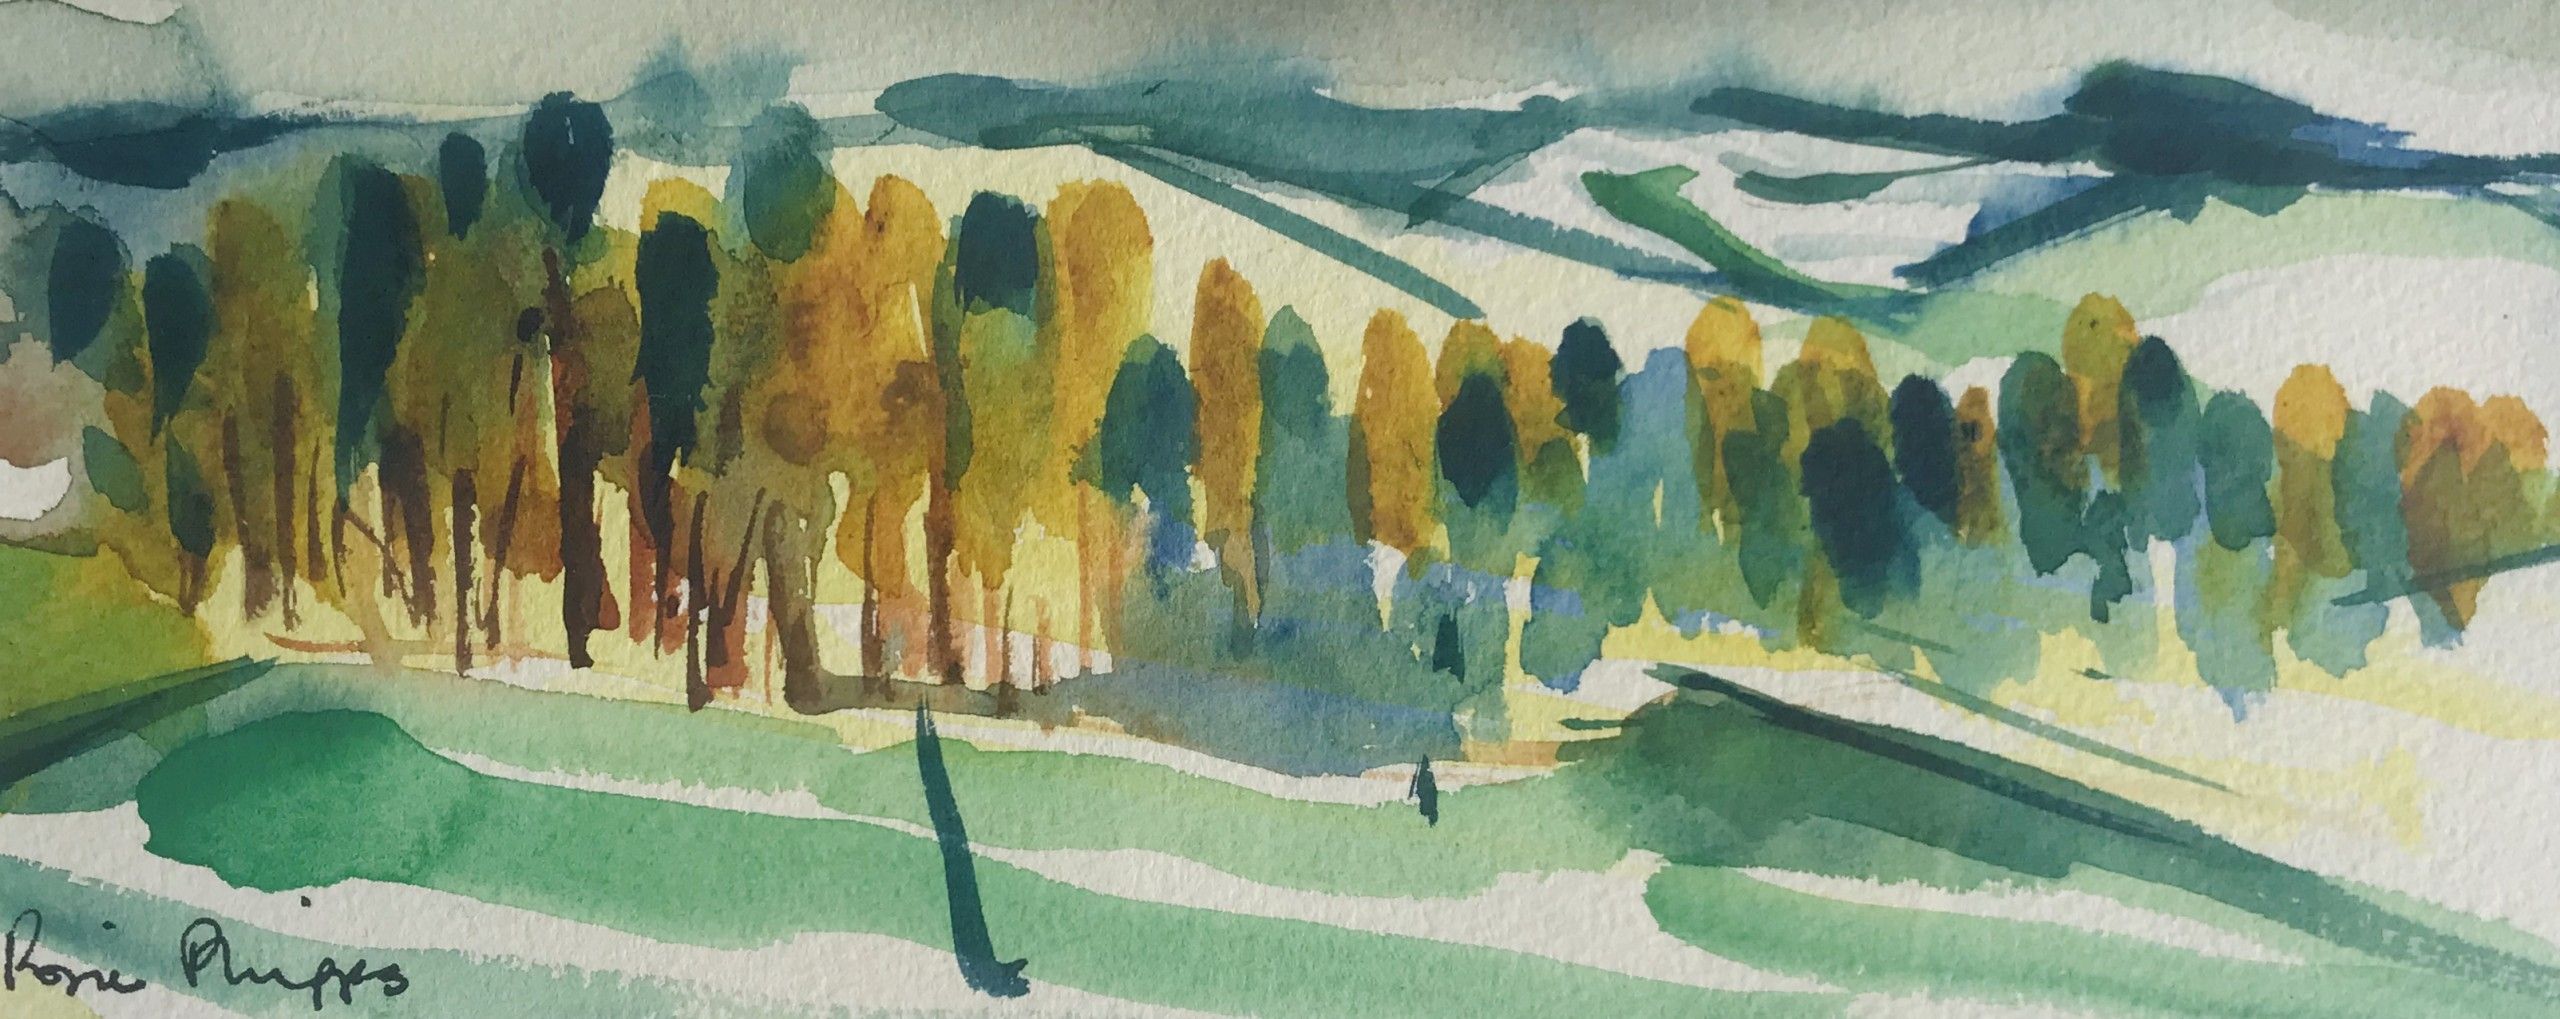 Cotswold Trees II by Rosie Phipps